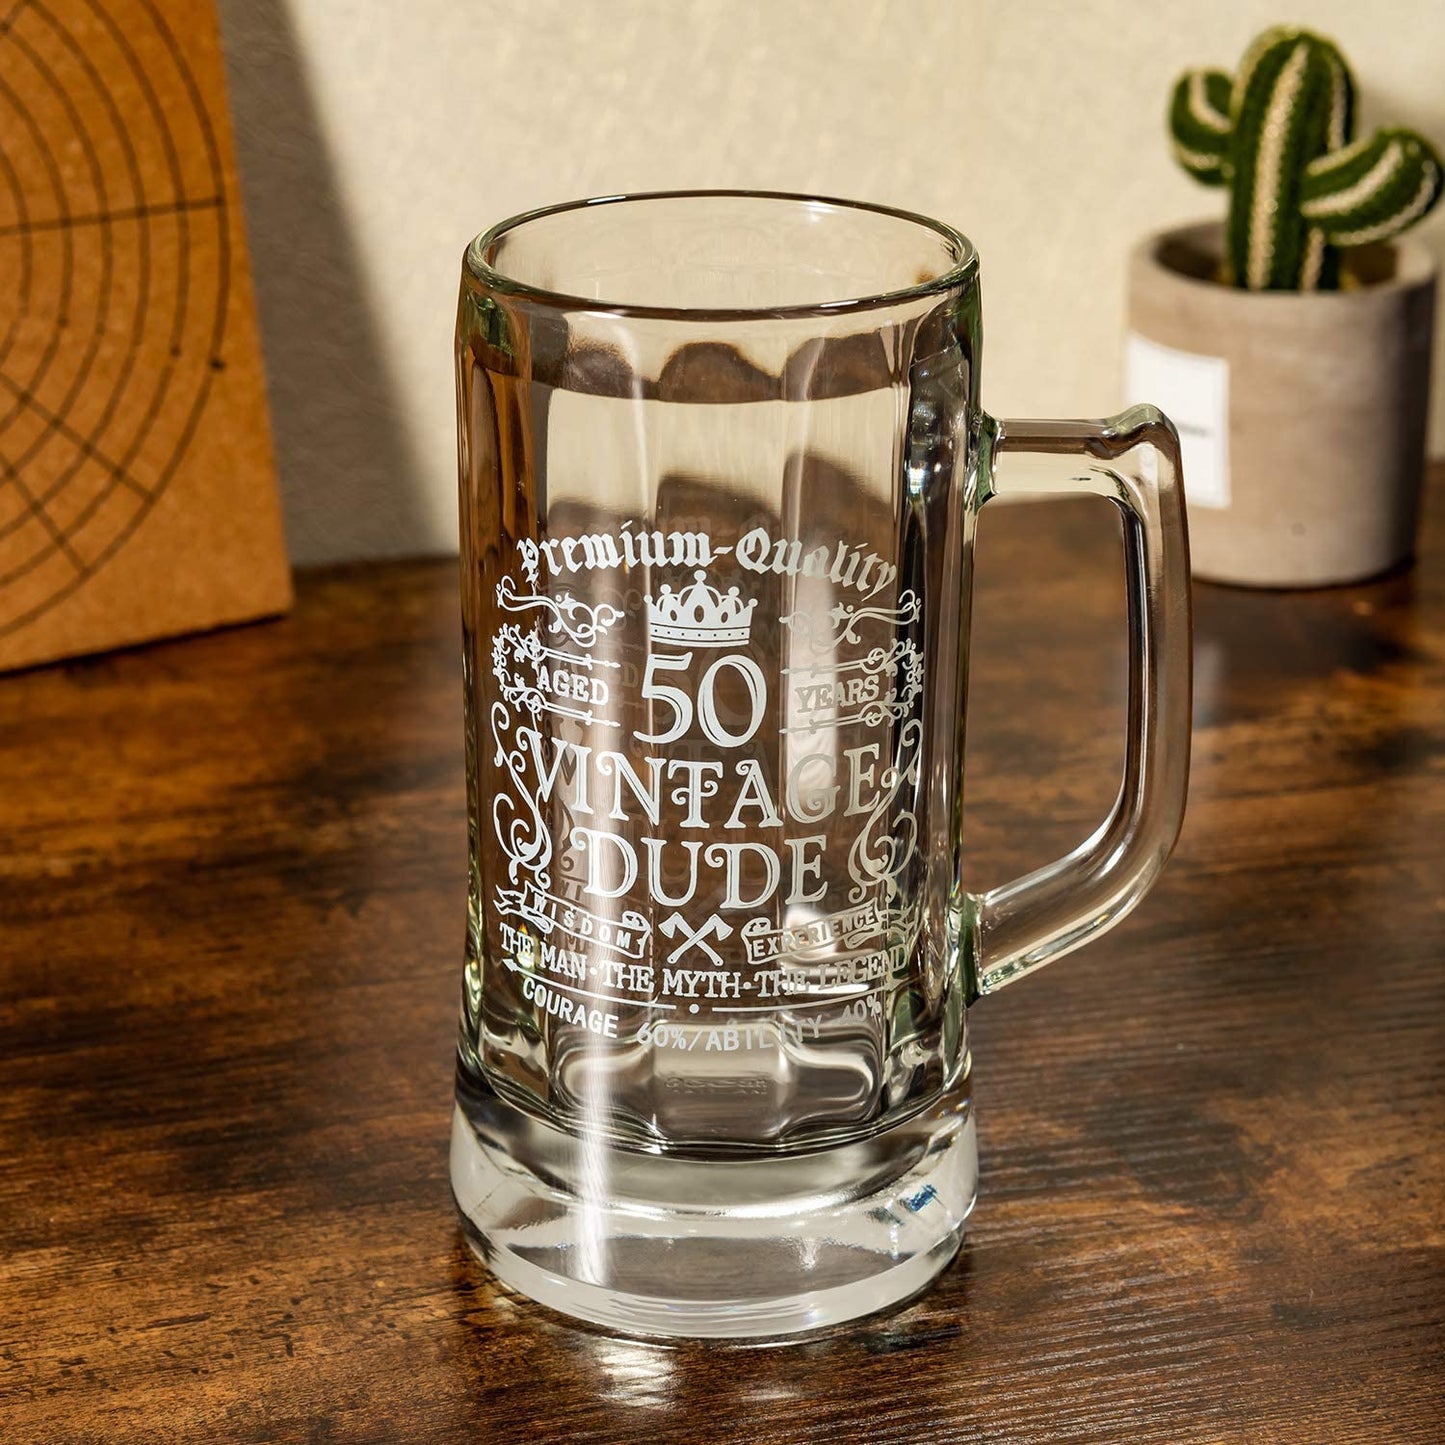 50Th Birthday Vintage Dude Beer Mug for Men 50 Years Old Gift 21 Oz Birthday Beer Glass for Him, Husband, Father, Brother Friends Uncle Coworker, Large Capacity Beer Mug Gift, with Box